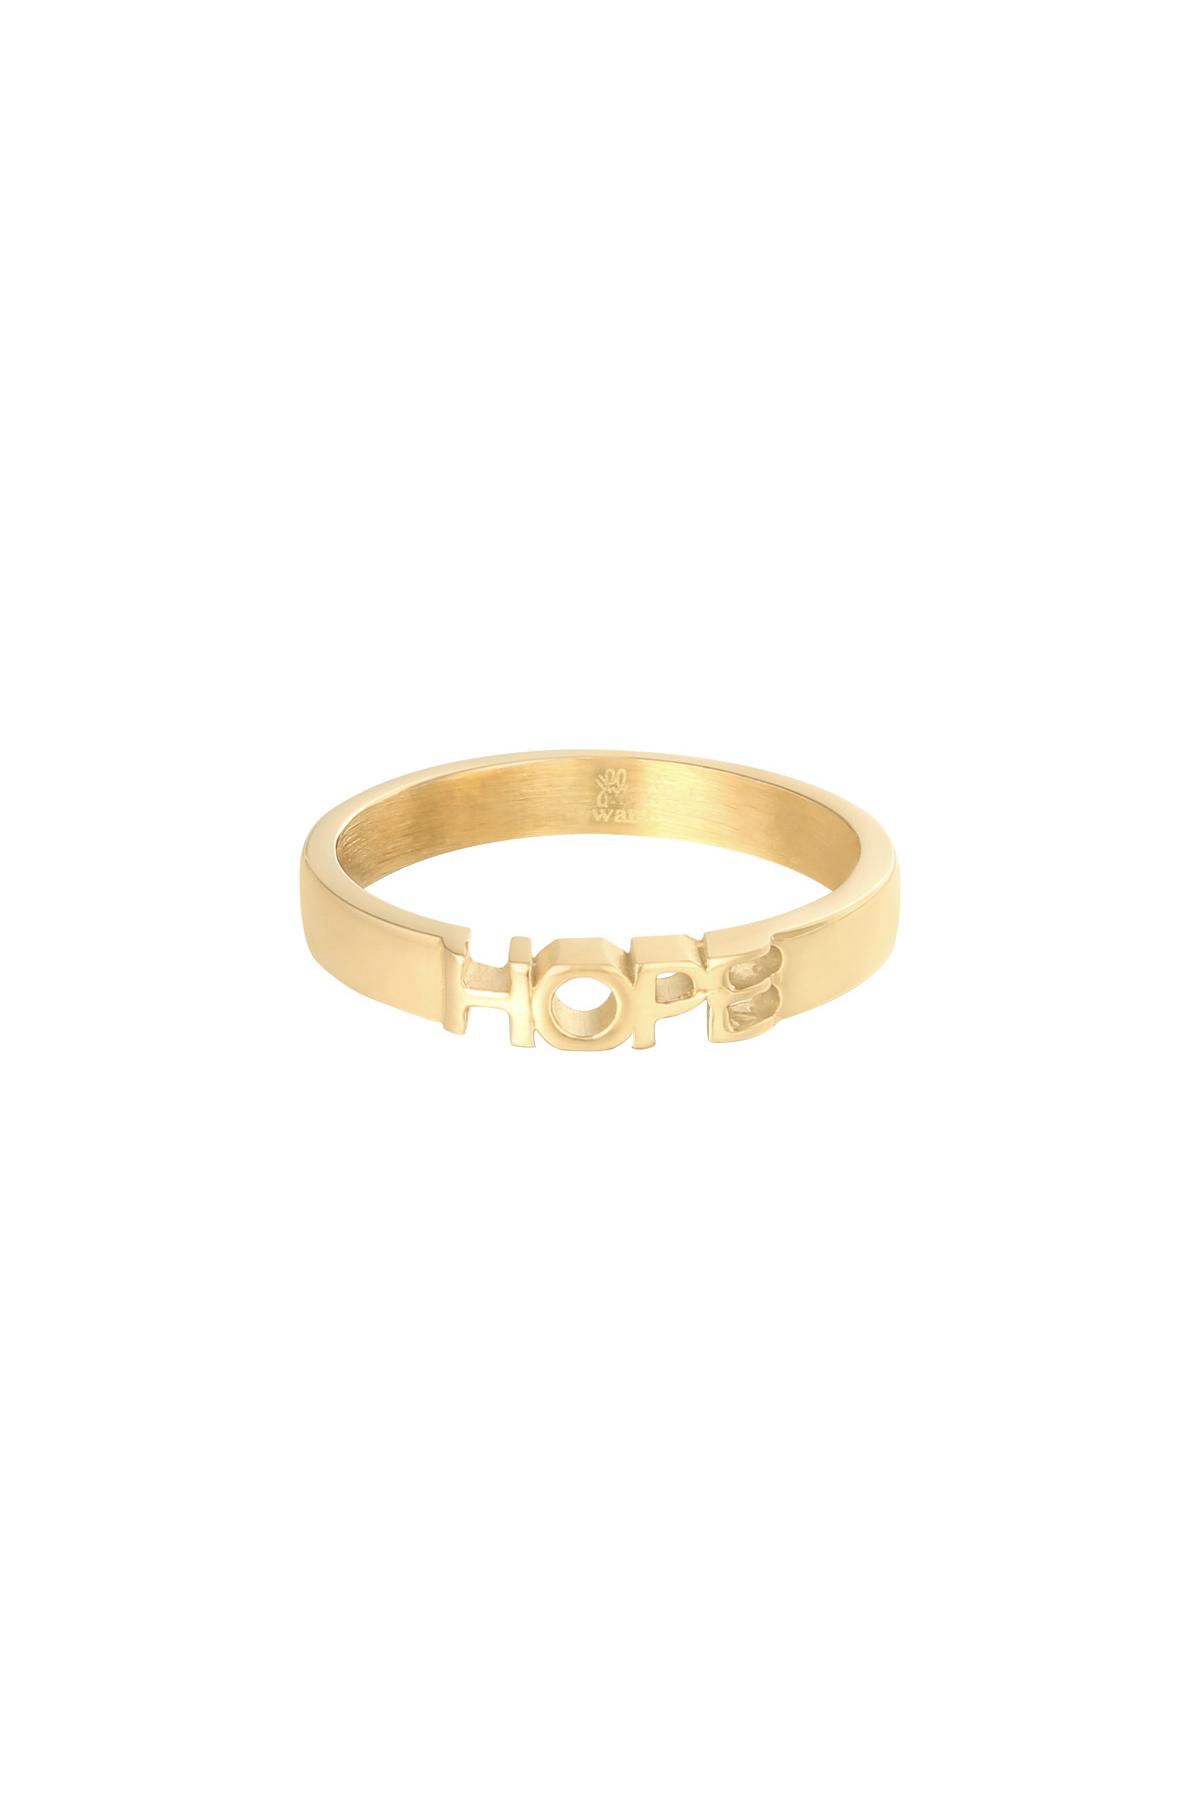 Gold / 16 / Ring Hope Gold Stainless Steel 16 